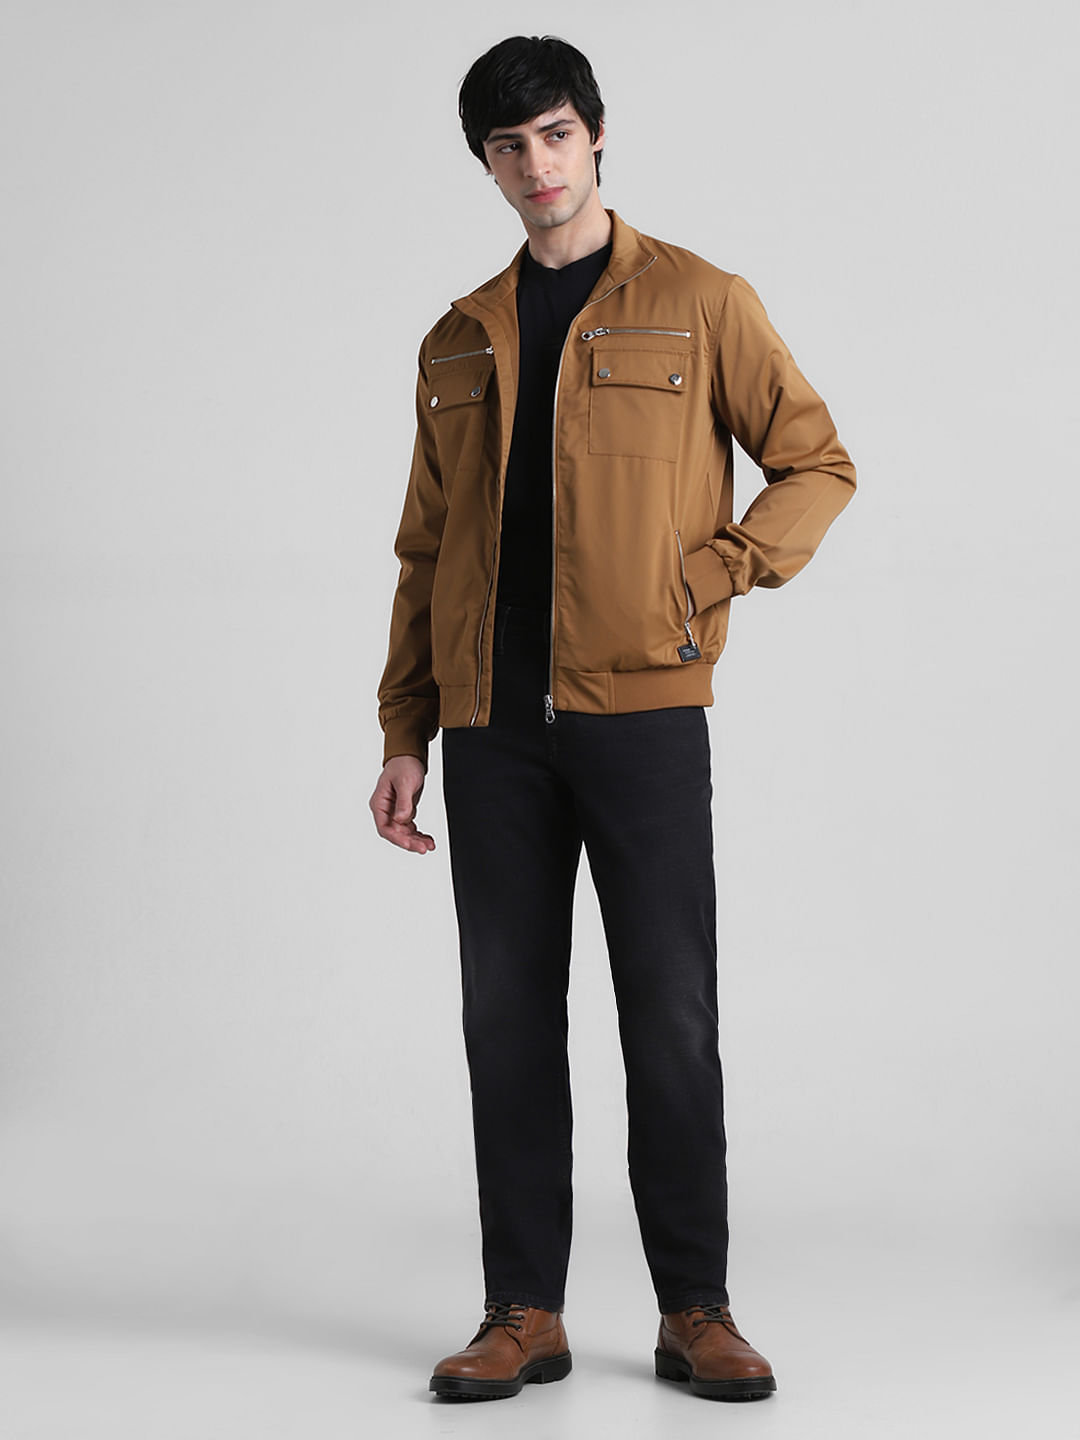 WHYIT Jacket for Men Men's High Quality Brown Denim Jacket (Color : Yellow,  Size : XXL) : Buy Online at Best Price in KSA - Souq is now Amazon.sa:  Fashion